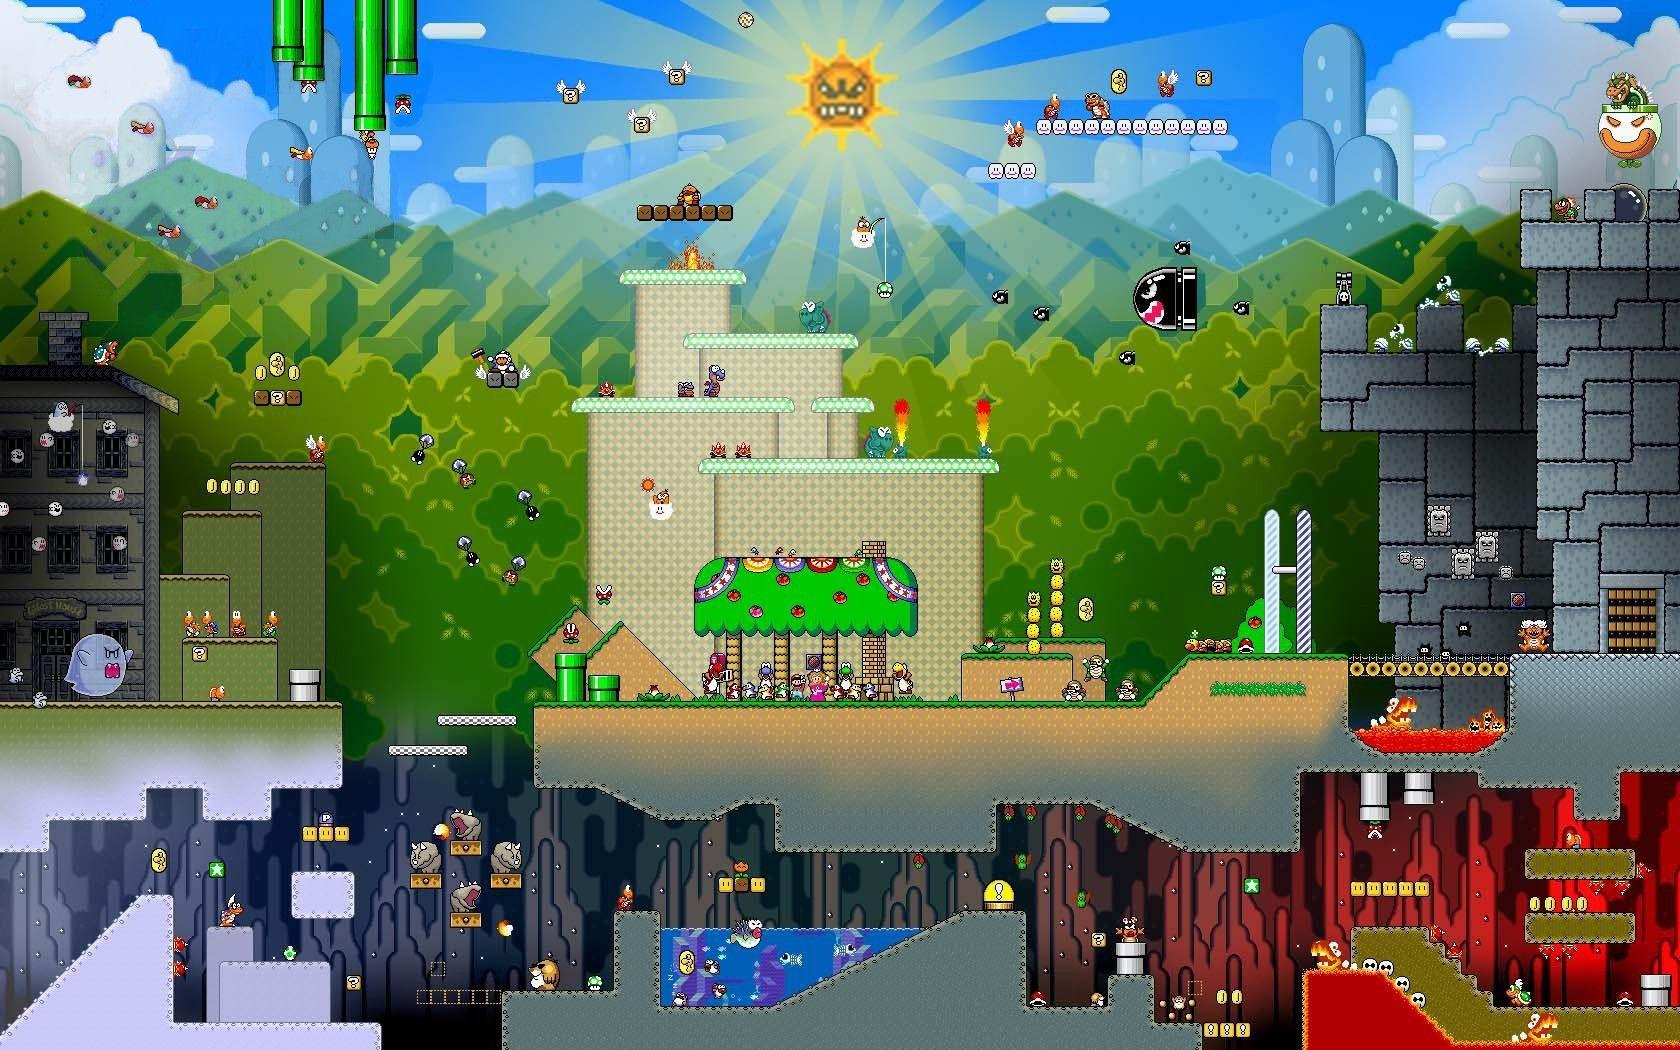 Epic Mario wallpapers is still my favorite